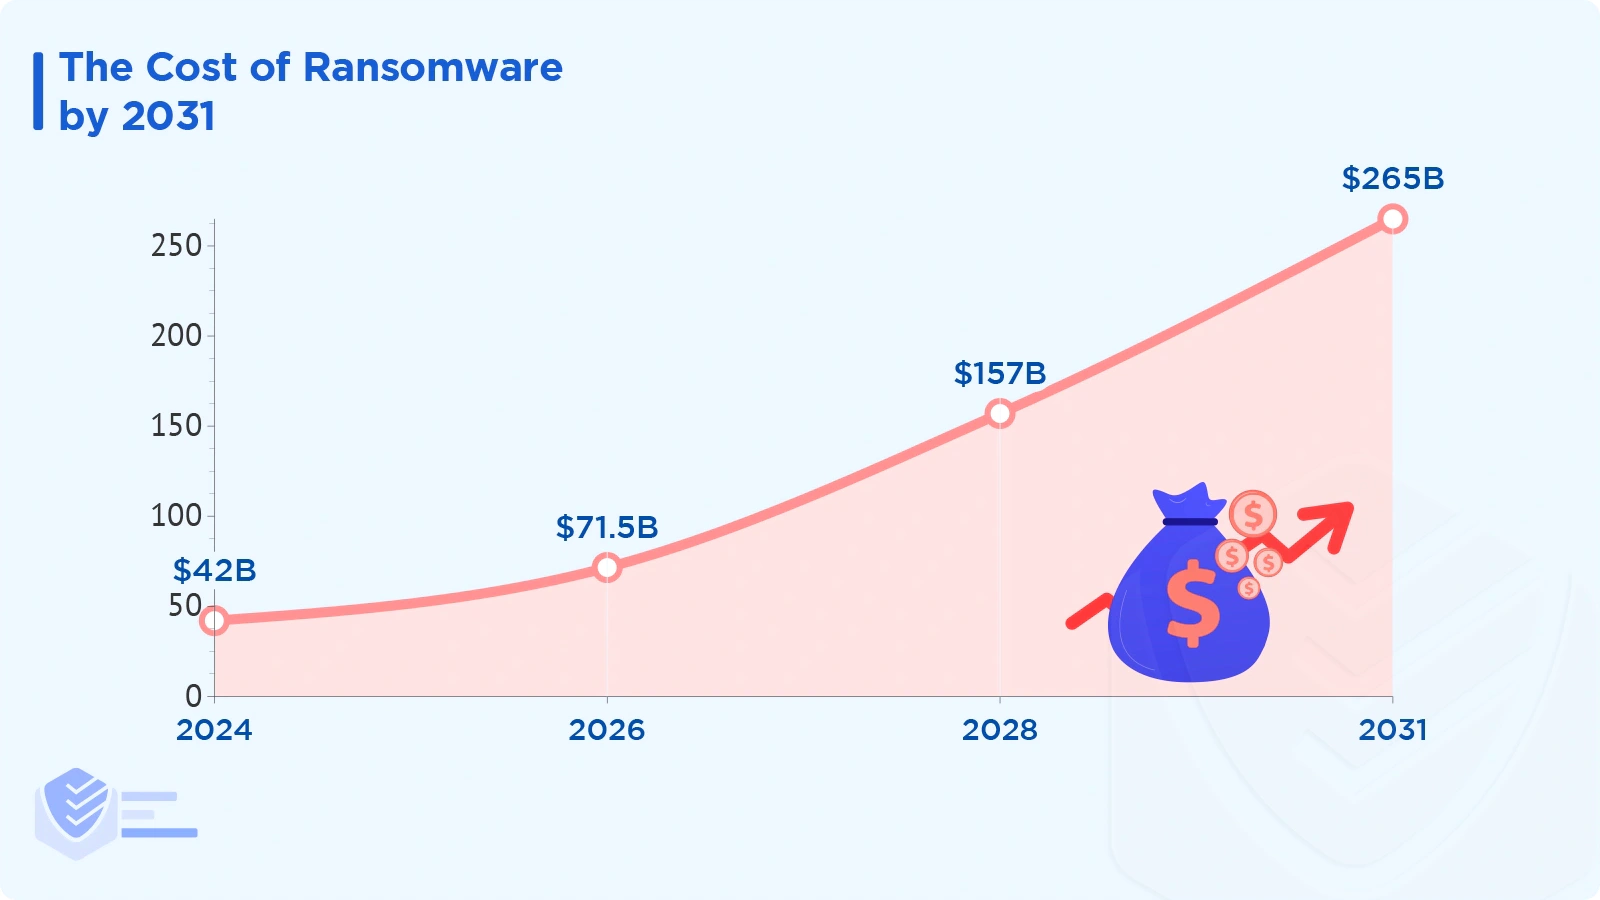 The cost of ransomware by 2031